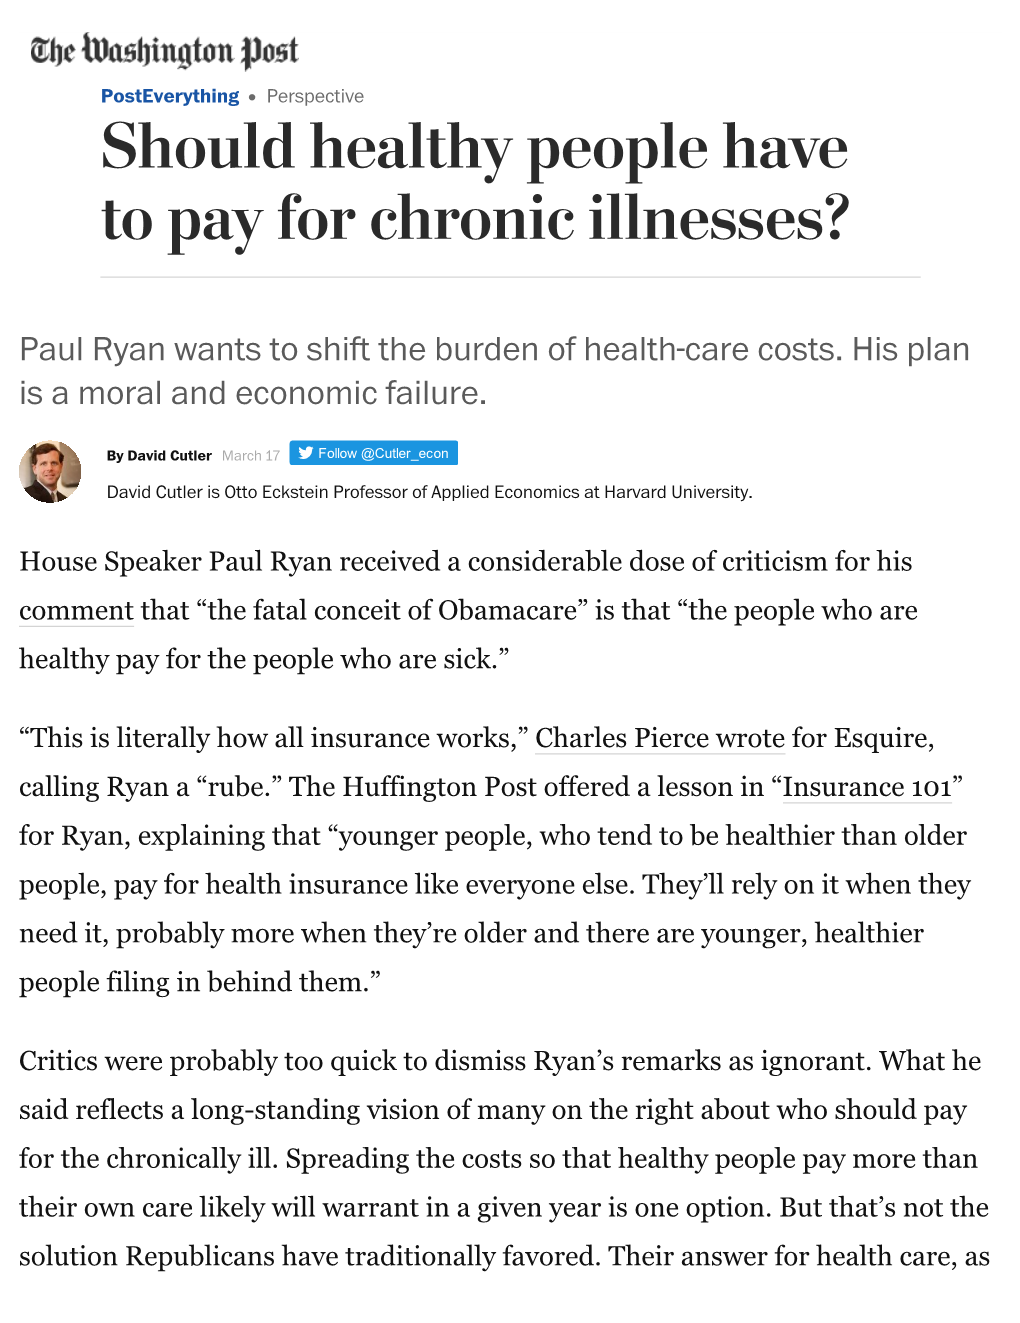 Should Healthy People Have to Pay for Chronic Illnesses?